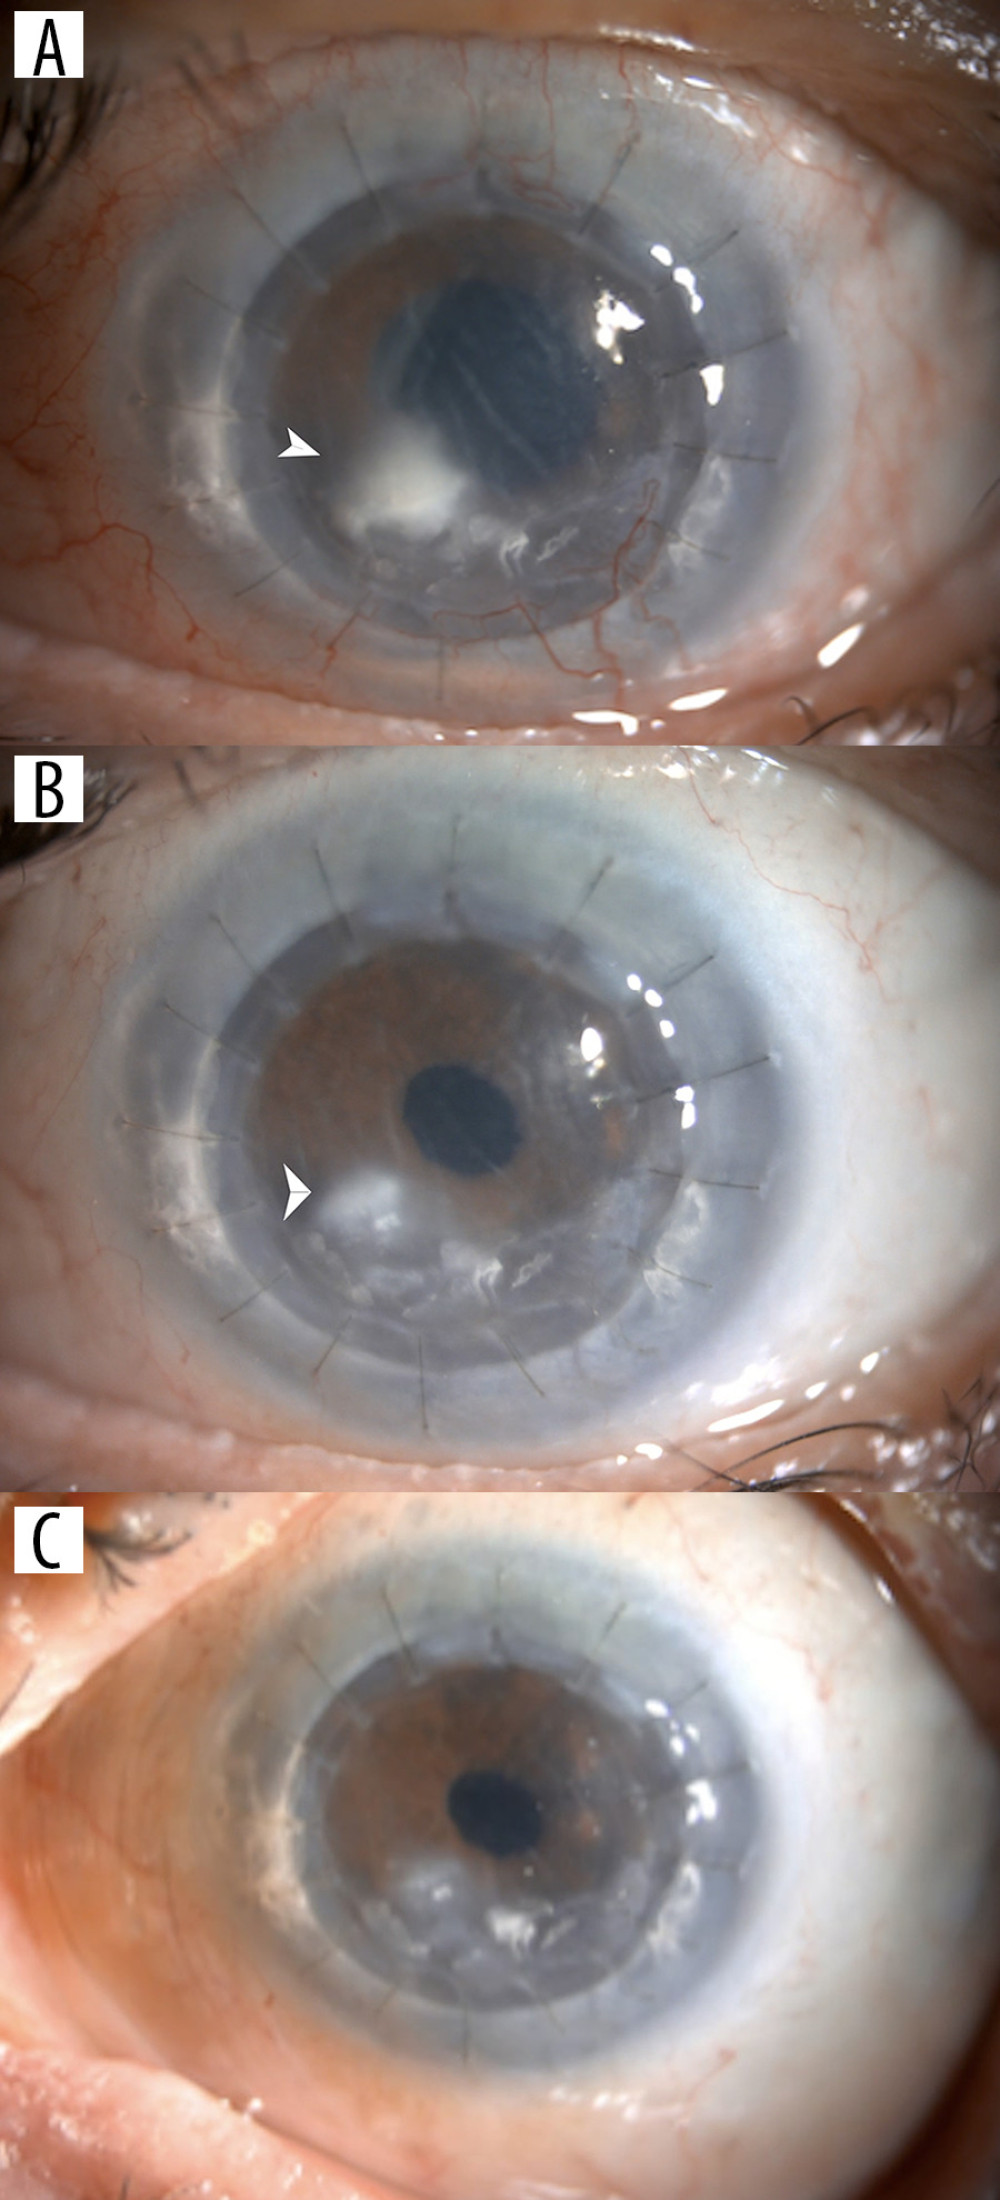 (A) Photo of the left eye showing the density of the corneal infiltrate with associated graft edema at presentation. (B) Photo of the left eye 2 weeks after treatment, with corneal scar, healed epithelial defect, and resolved hypopyon. (C) Photo of the left eye 2 months after treatment. The photo shows resolved graft edema with a faint superficial scar.